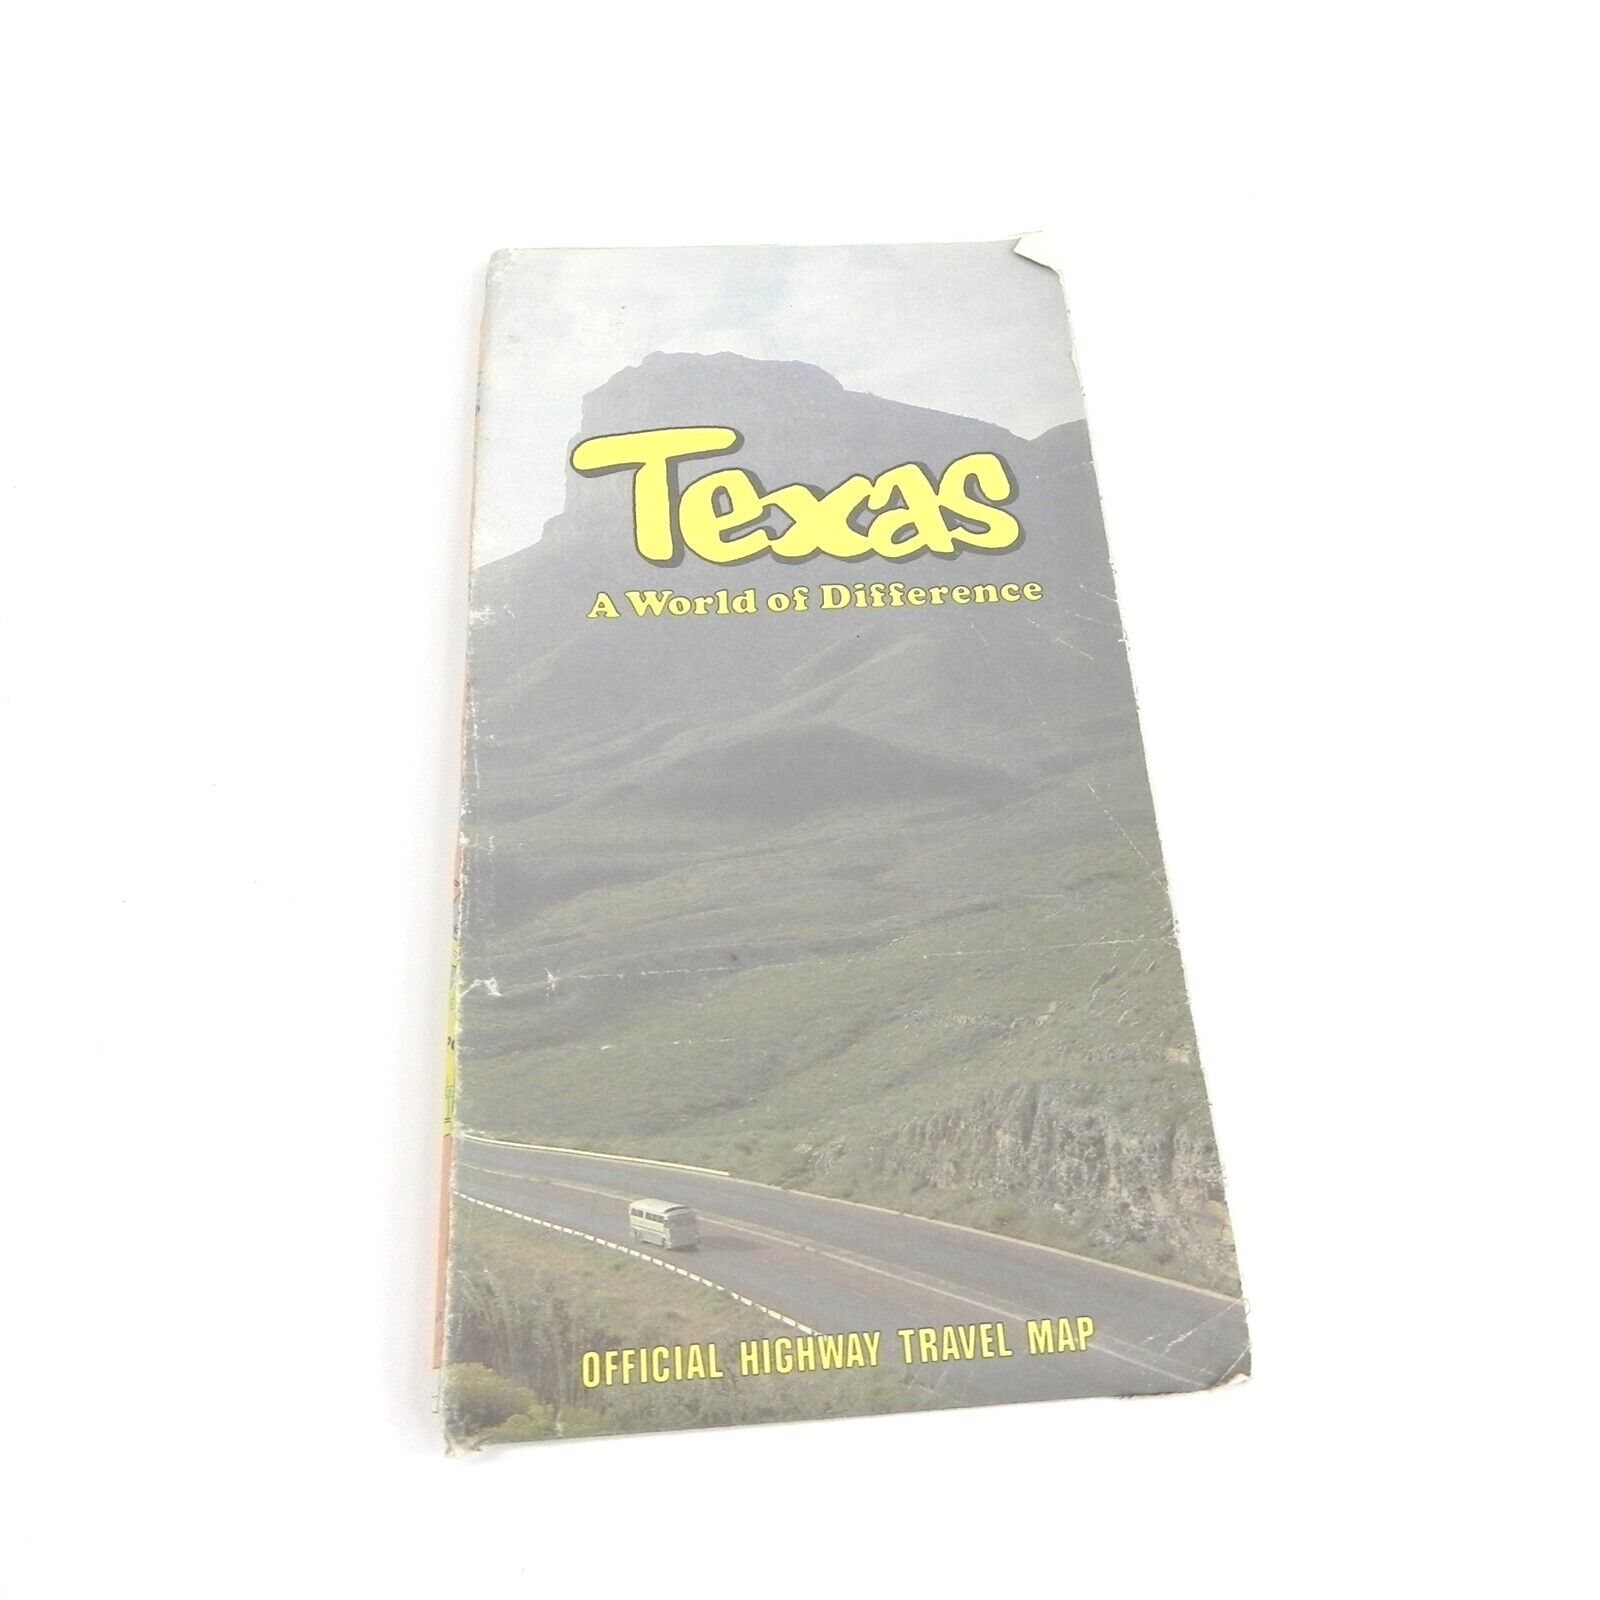 VINTAGE 1970S OFFICIAL ROAD MAP OF TEXAS HIGHWAY TOURING GUIDE GAS PROMO